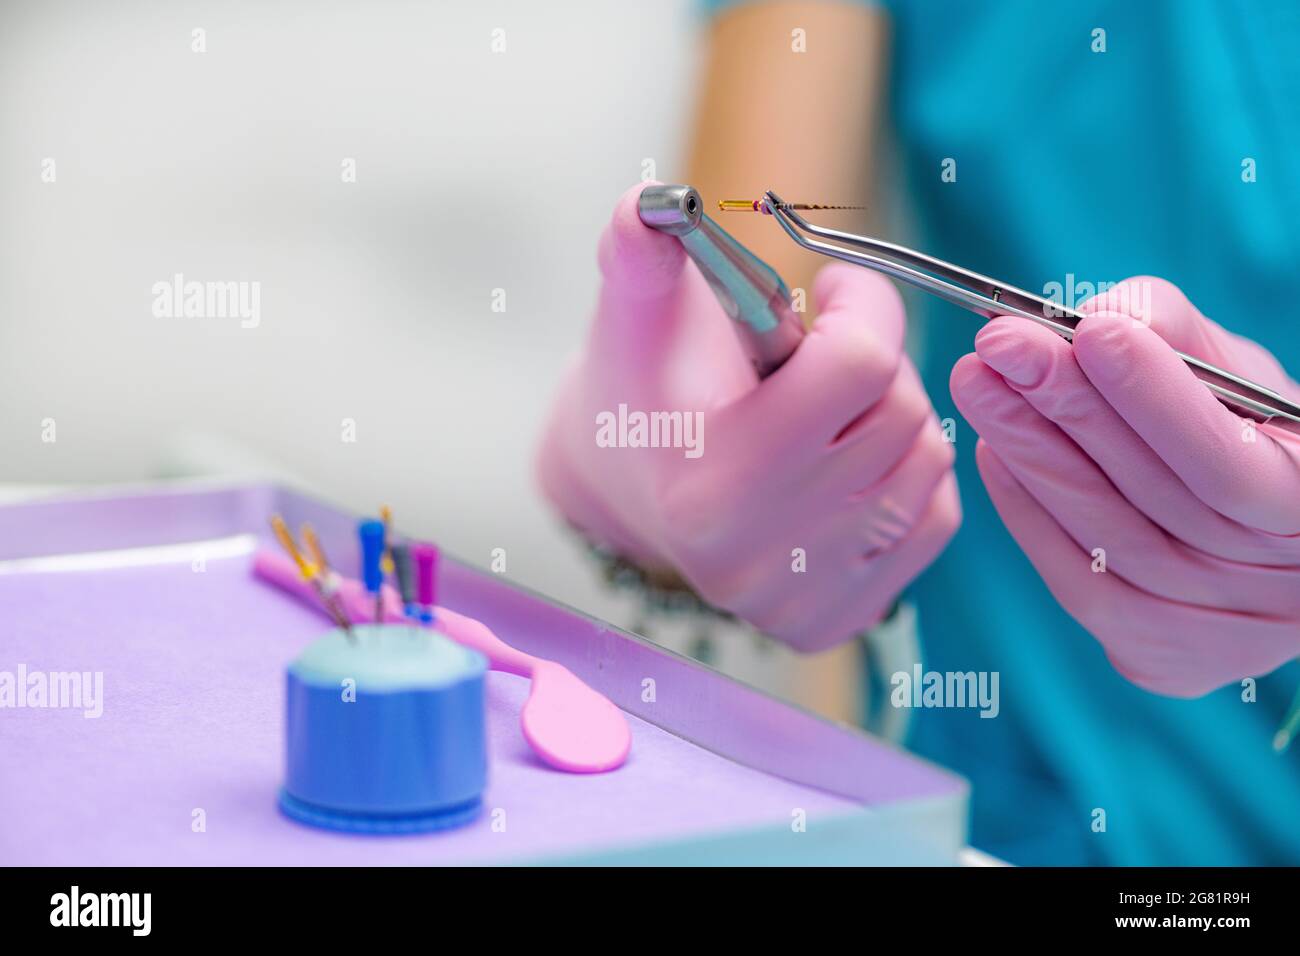 Preparing for endodontic root canal treatment Stock Photo